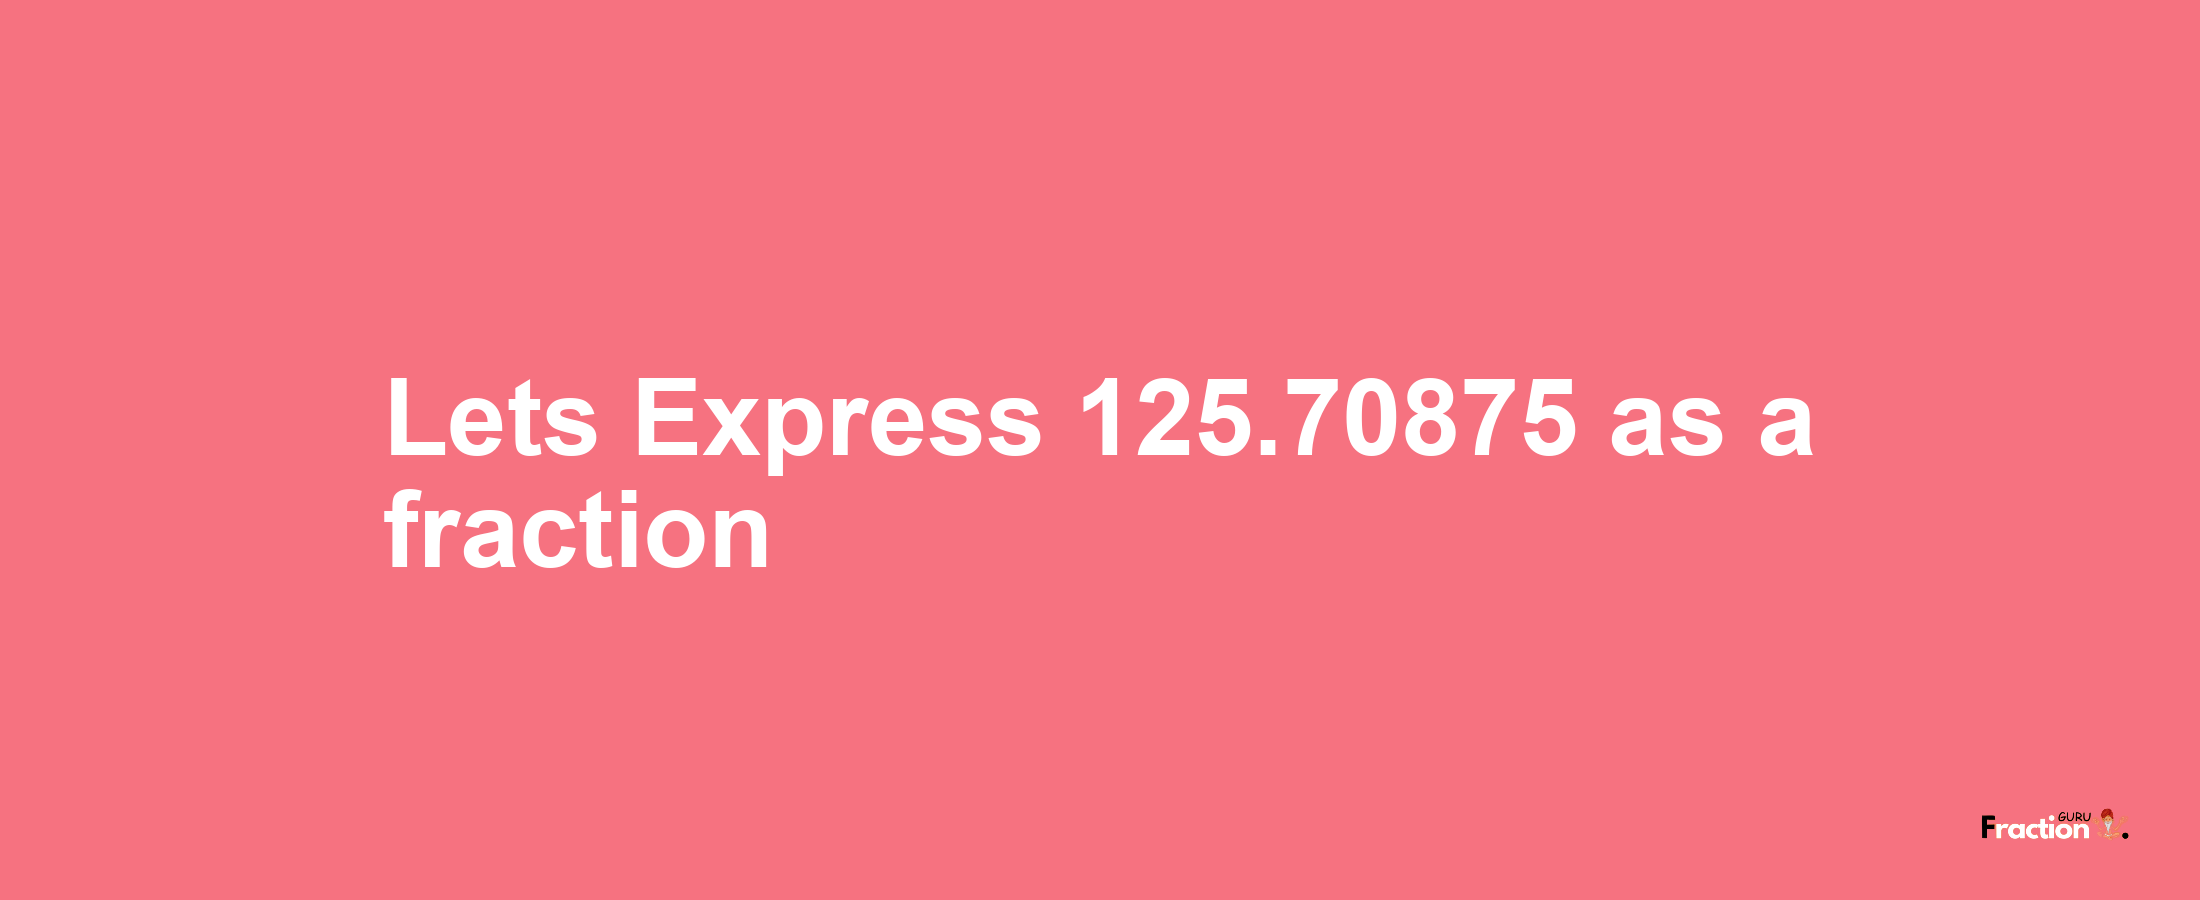 Lets Express 125.70875 as afraction